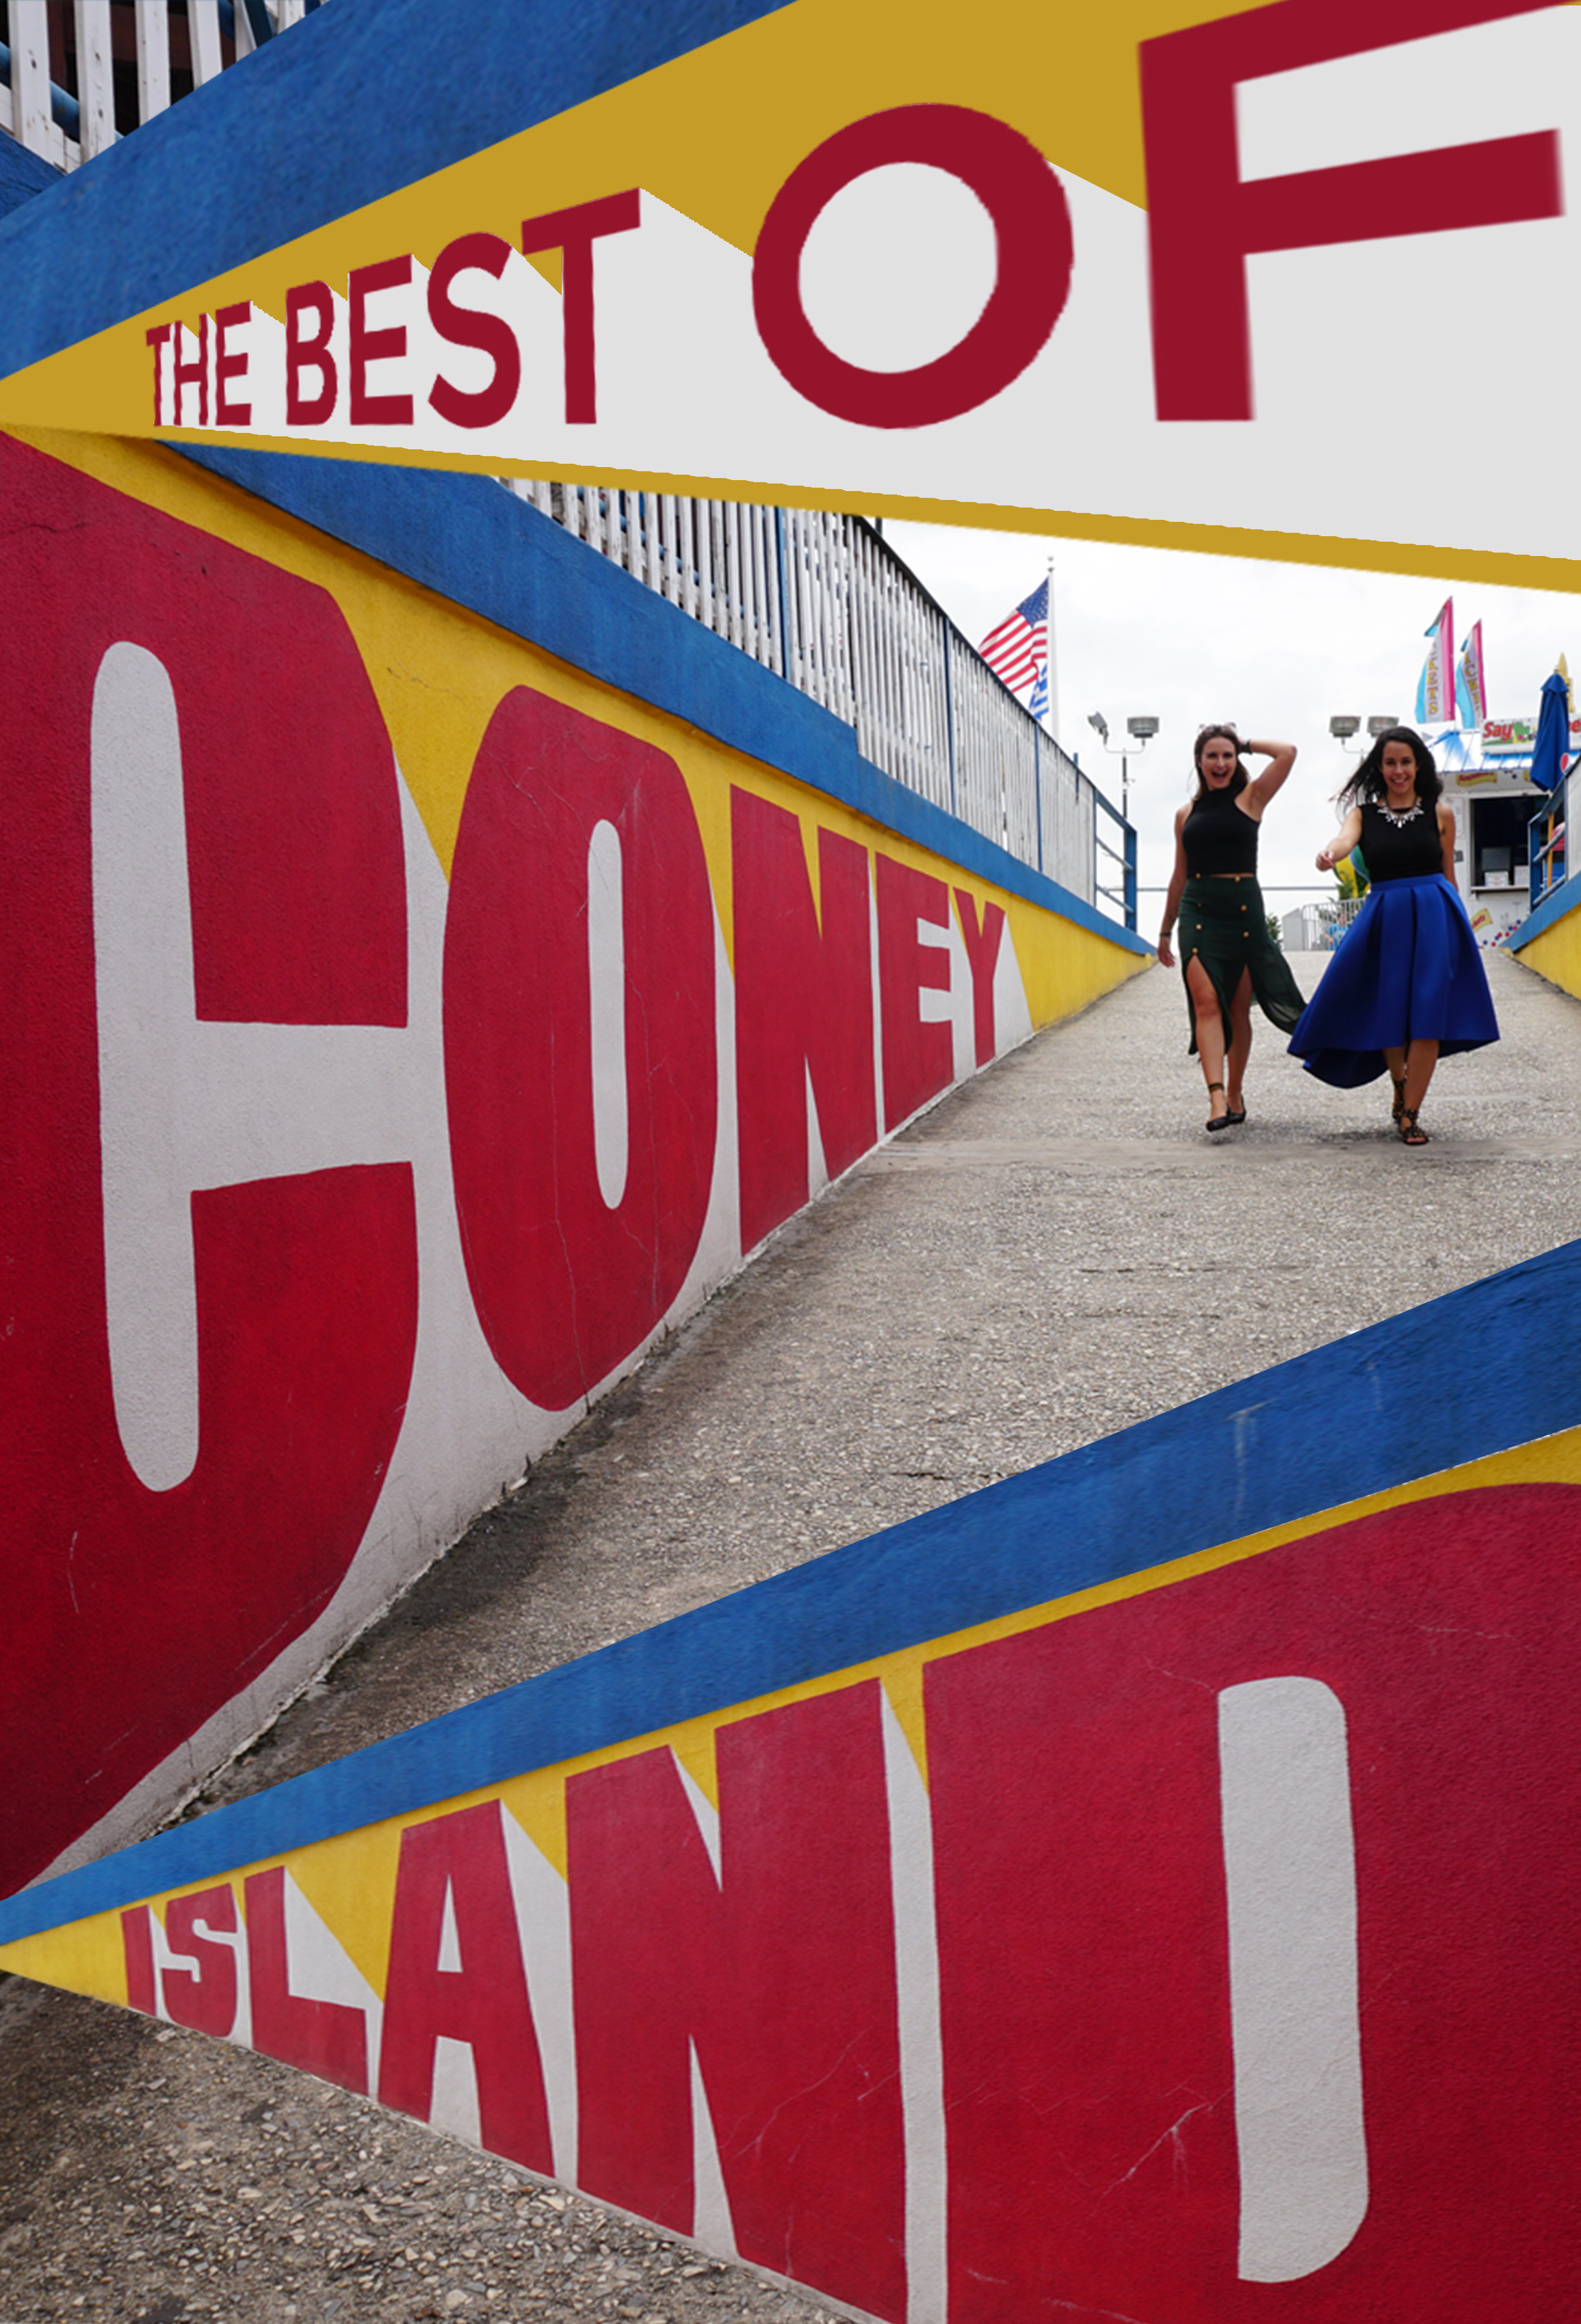 Best Things To Do in Coney Island